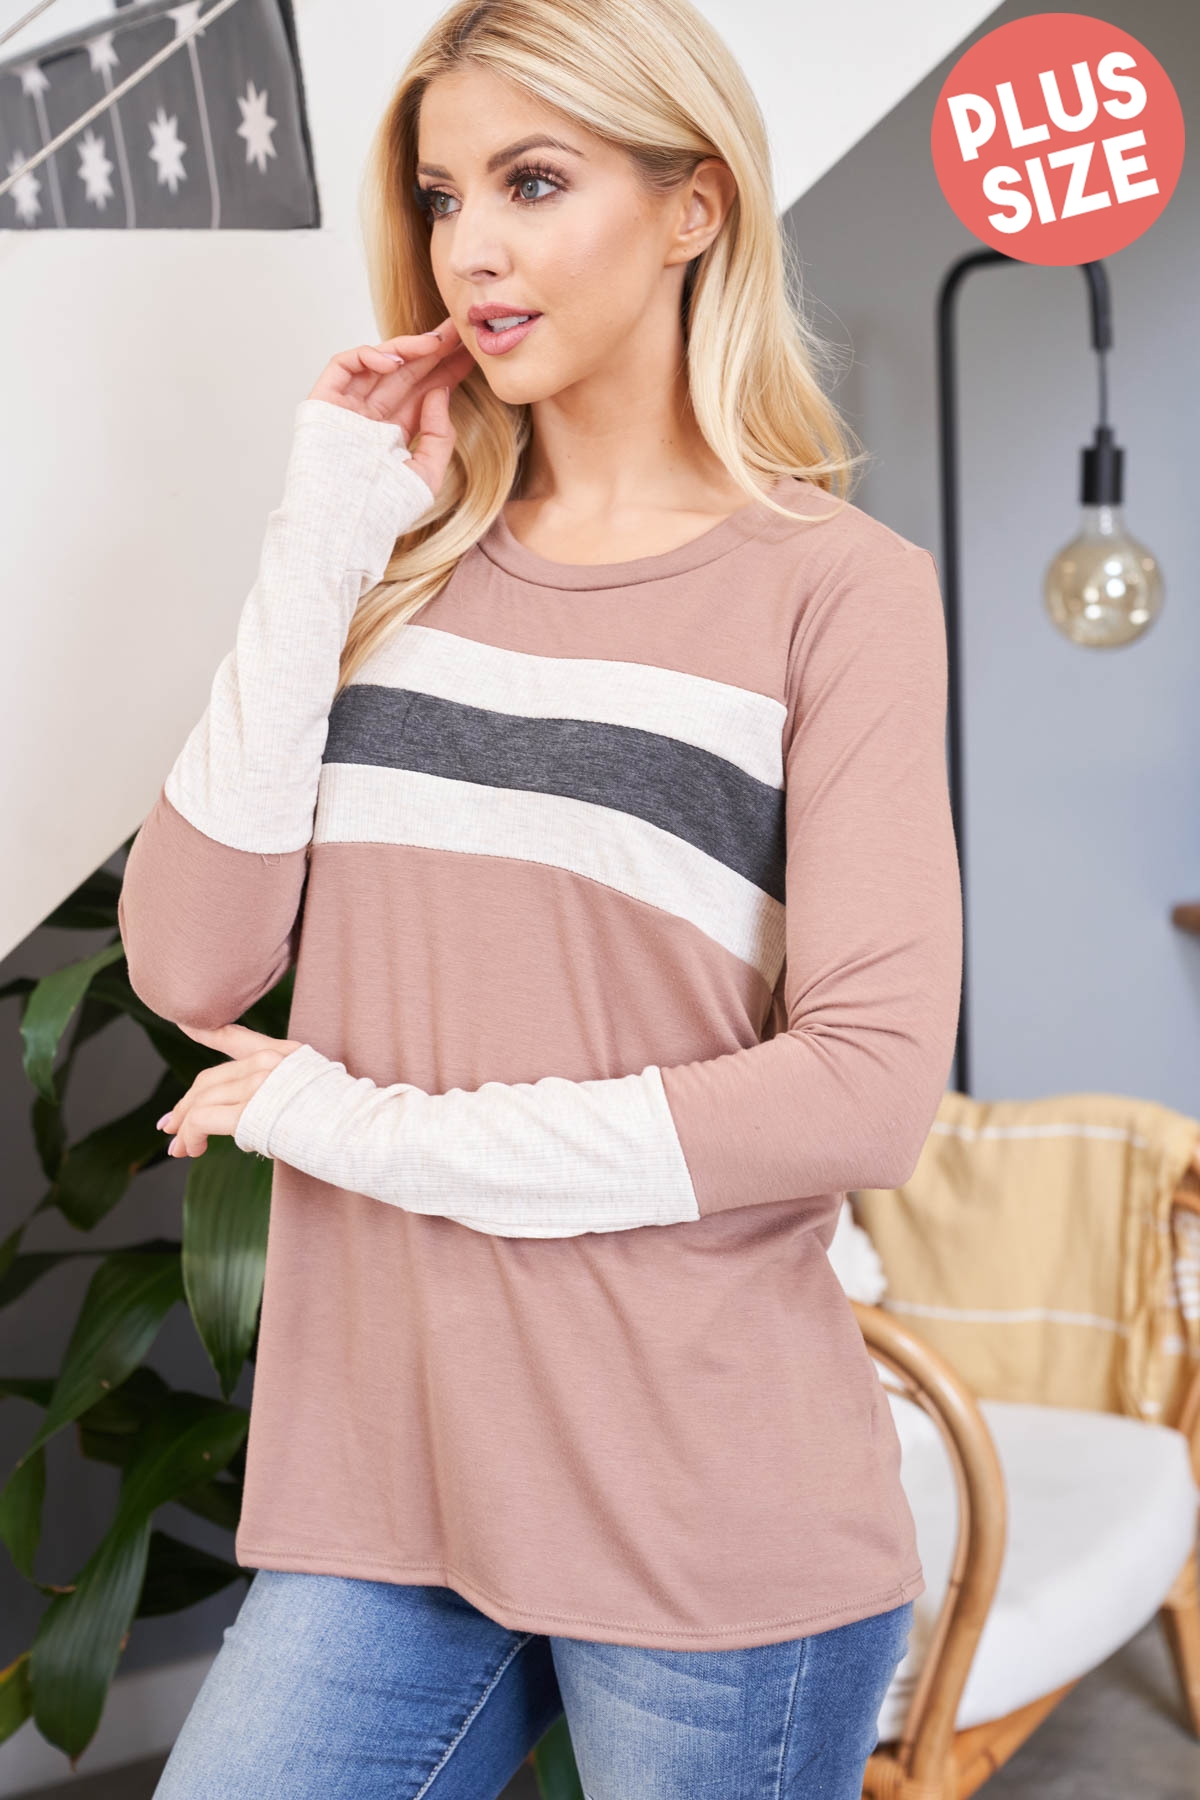 S15-10-2-PPT2673X-NWMCHOTMCHL - PLUS SIZE THUMBHOLE LONG SLEEVE RIB CONTRAST TOP- NEW MOCHA/H. OATMEAL/CHARCOAL 3-2-1 (NOW $7.75 ONLY! )